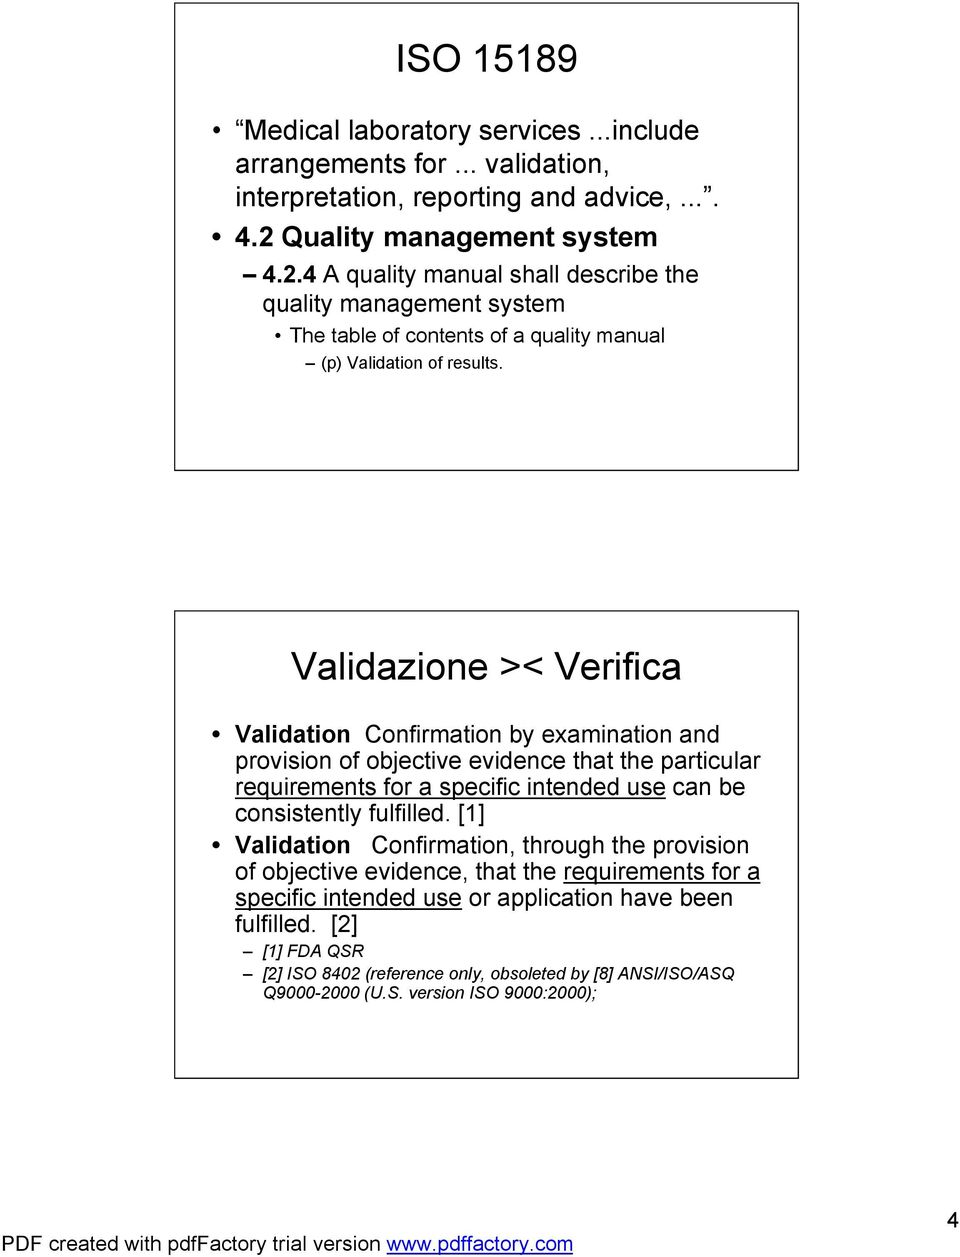 Validazione >< Verifica Validation Confirmation by examination and provision of objective evidence that the particular requirements for a specific intended use can be consistently fulfilled.